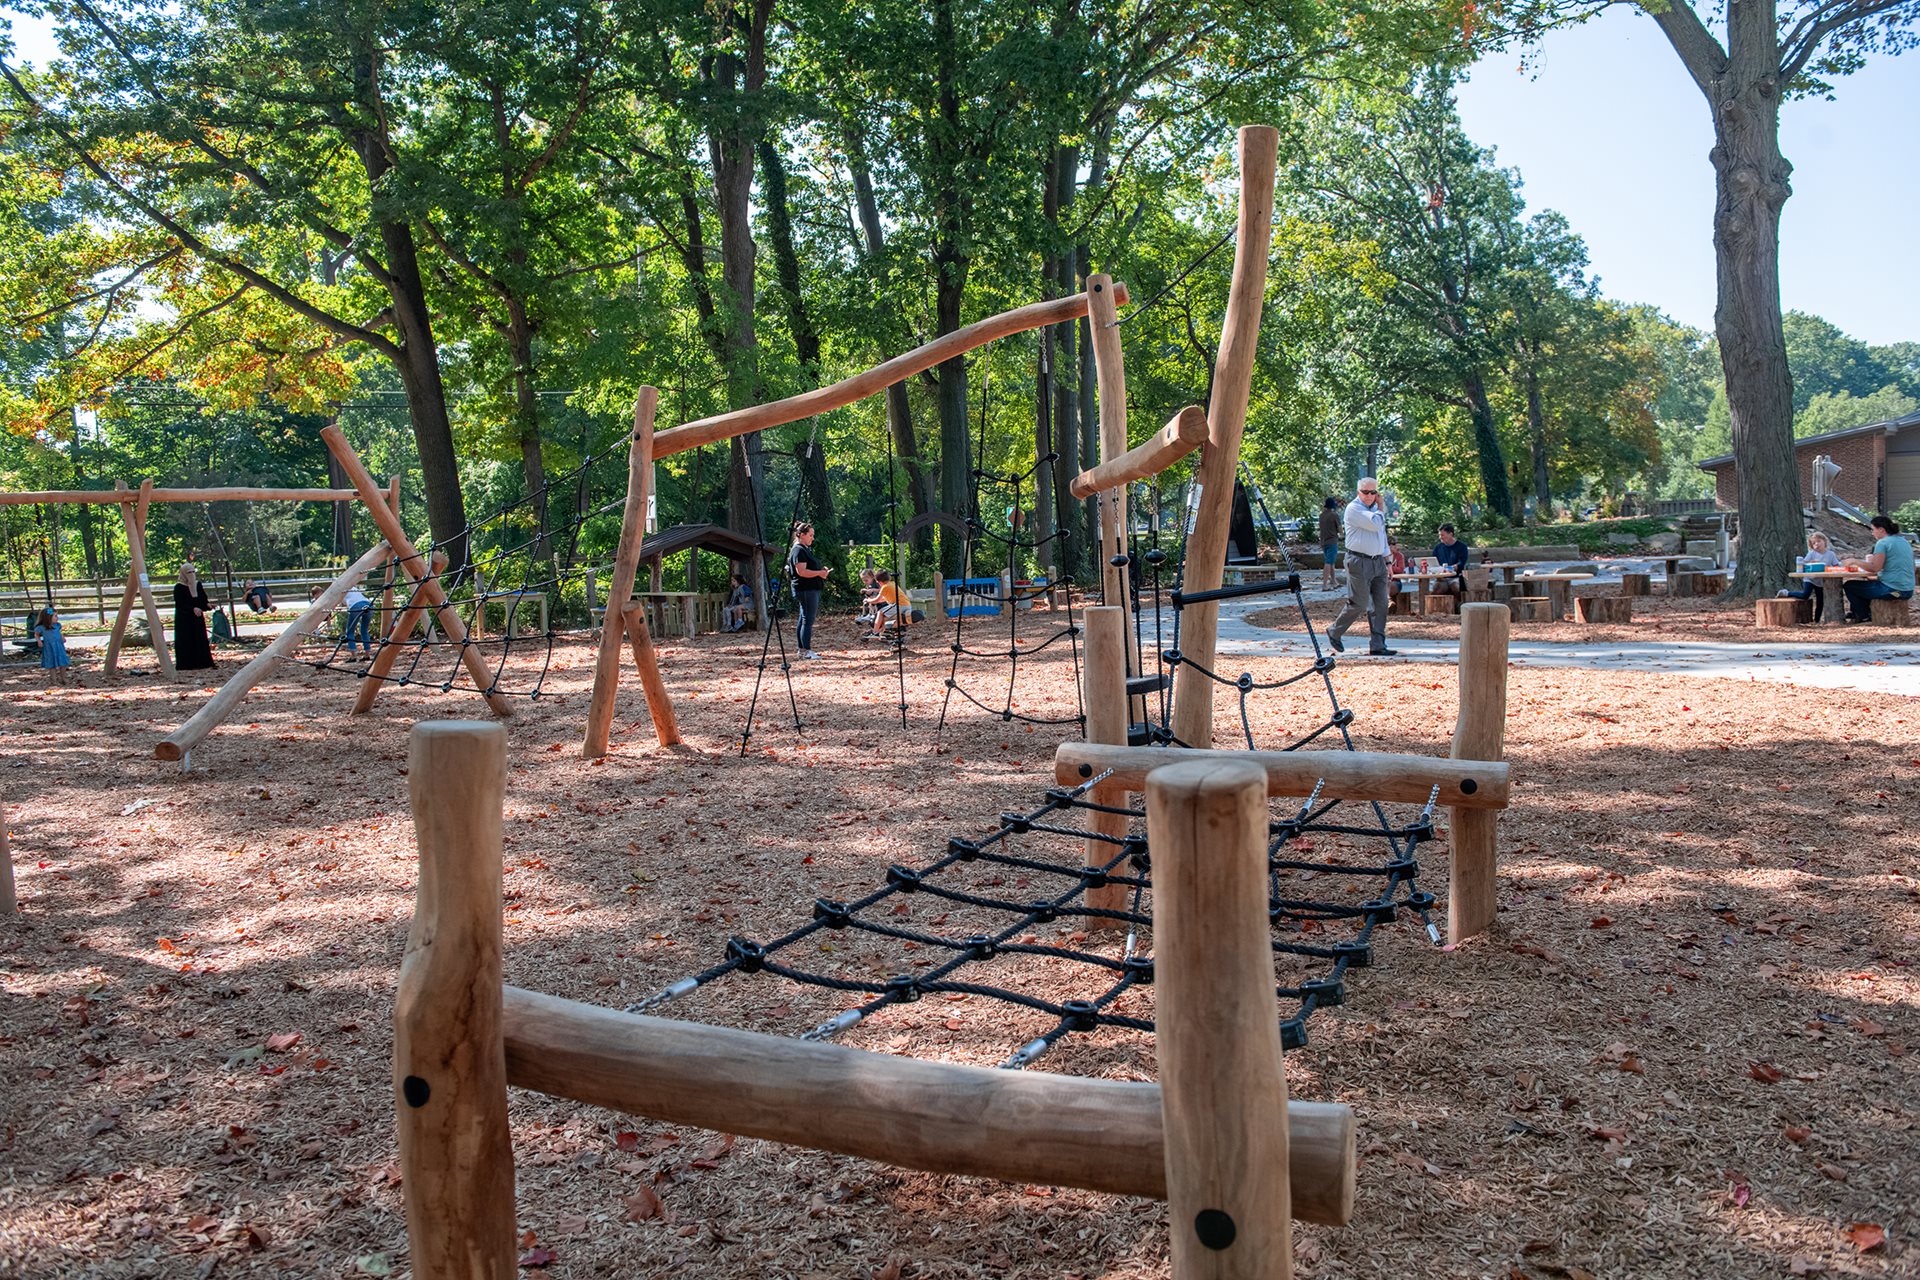 Cleveland Metroparks Opens Karen’s Way Play Space in Huntington Reservation